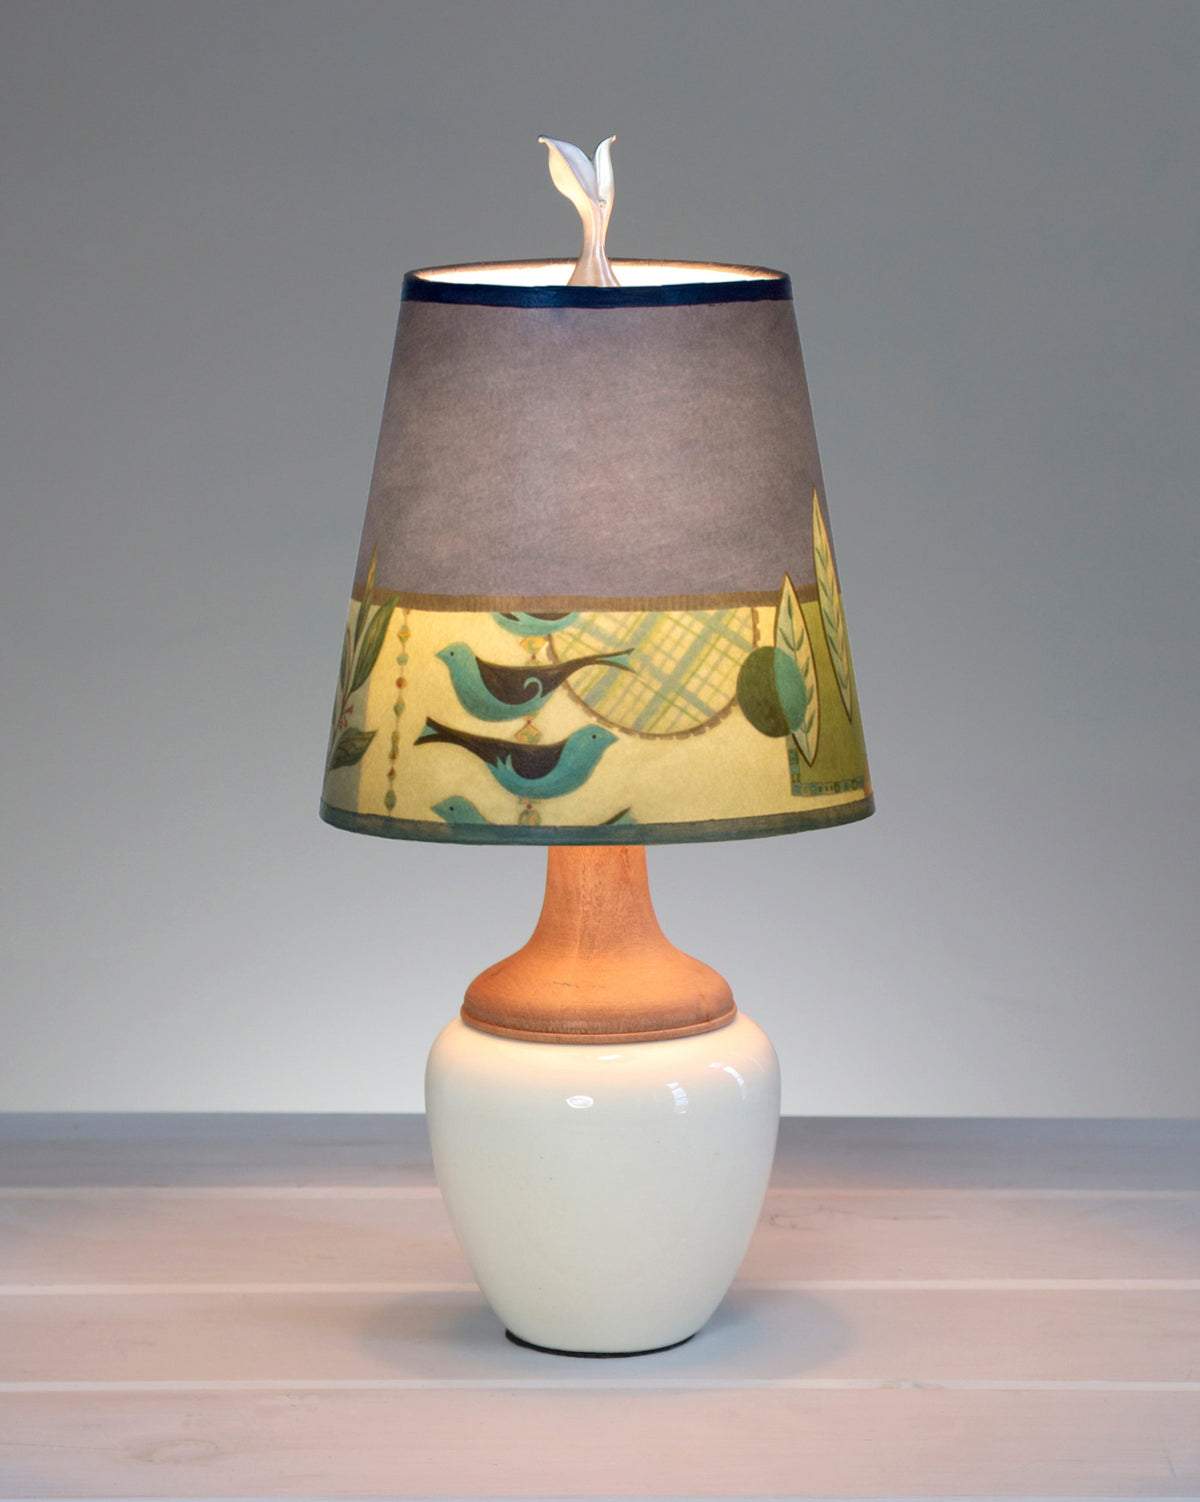 Ceramic and Maple Table Lamp with Small Drum Shade in New Capri Periwinkle